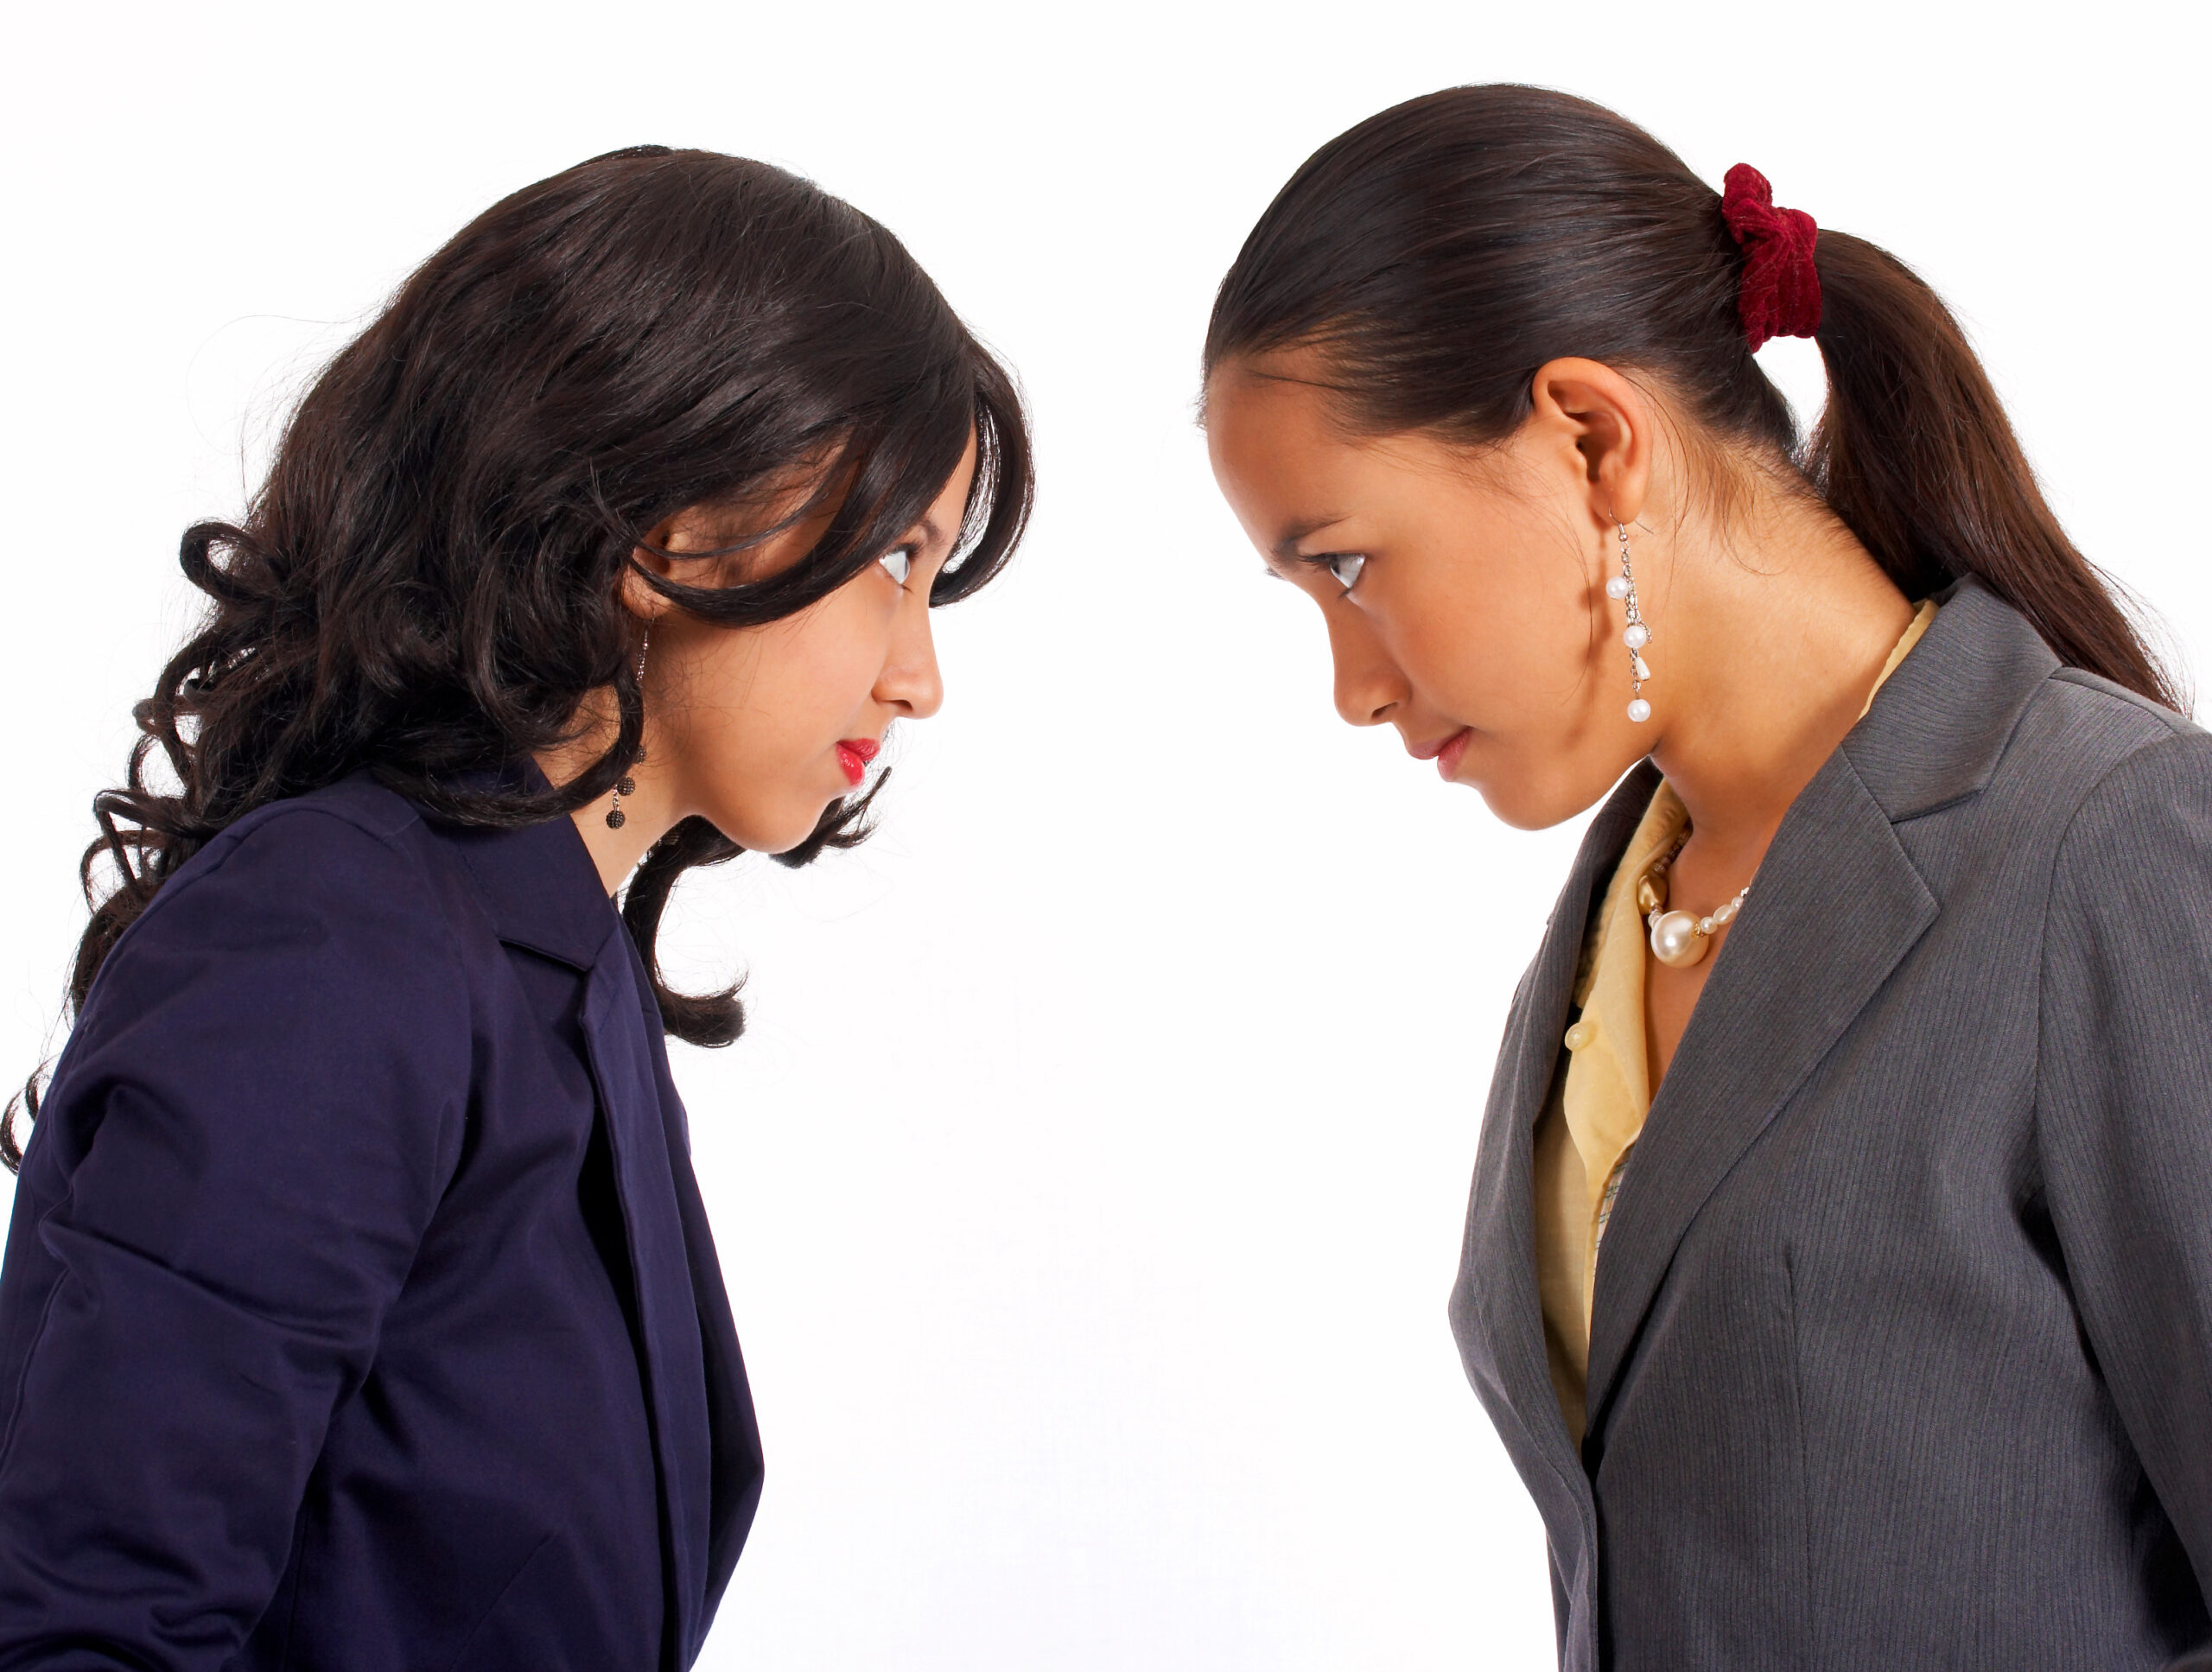 How to Successfully Defuse Conflicts at Work